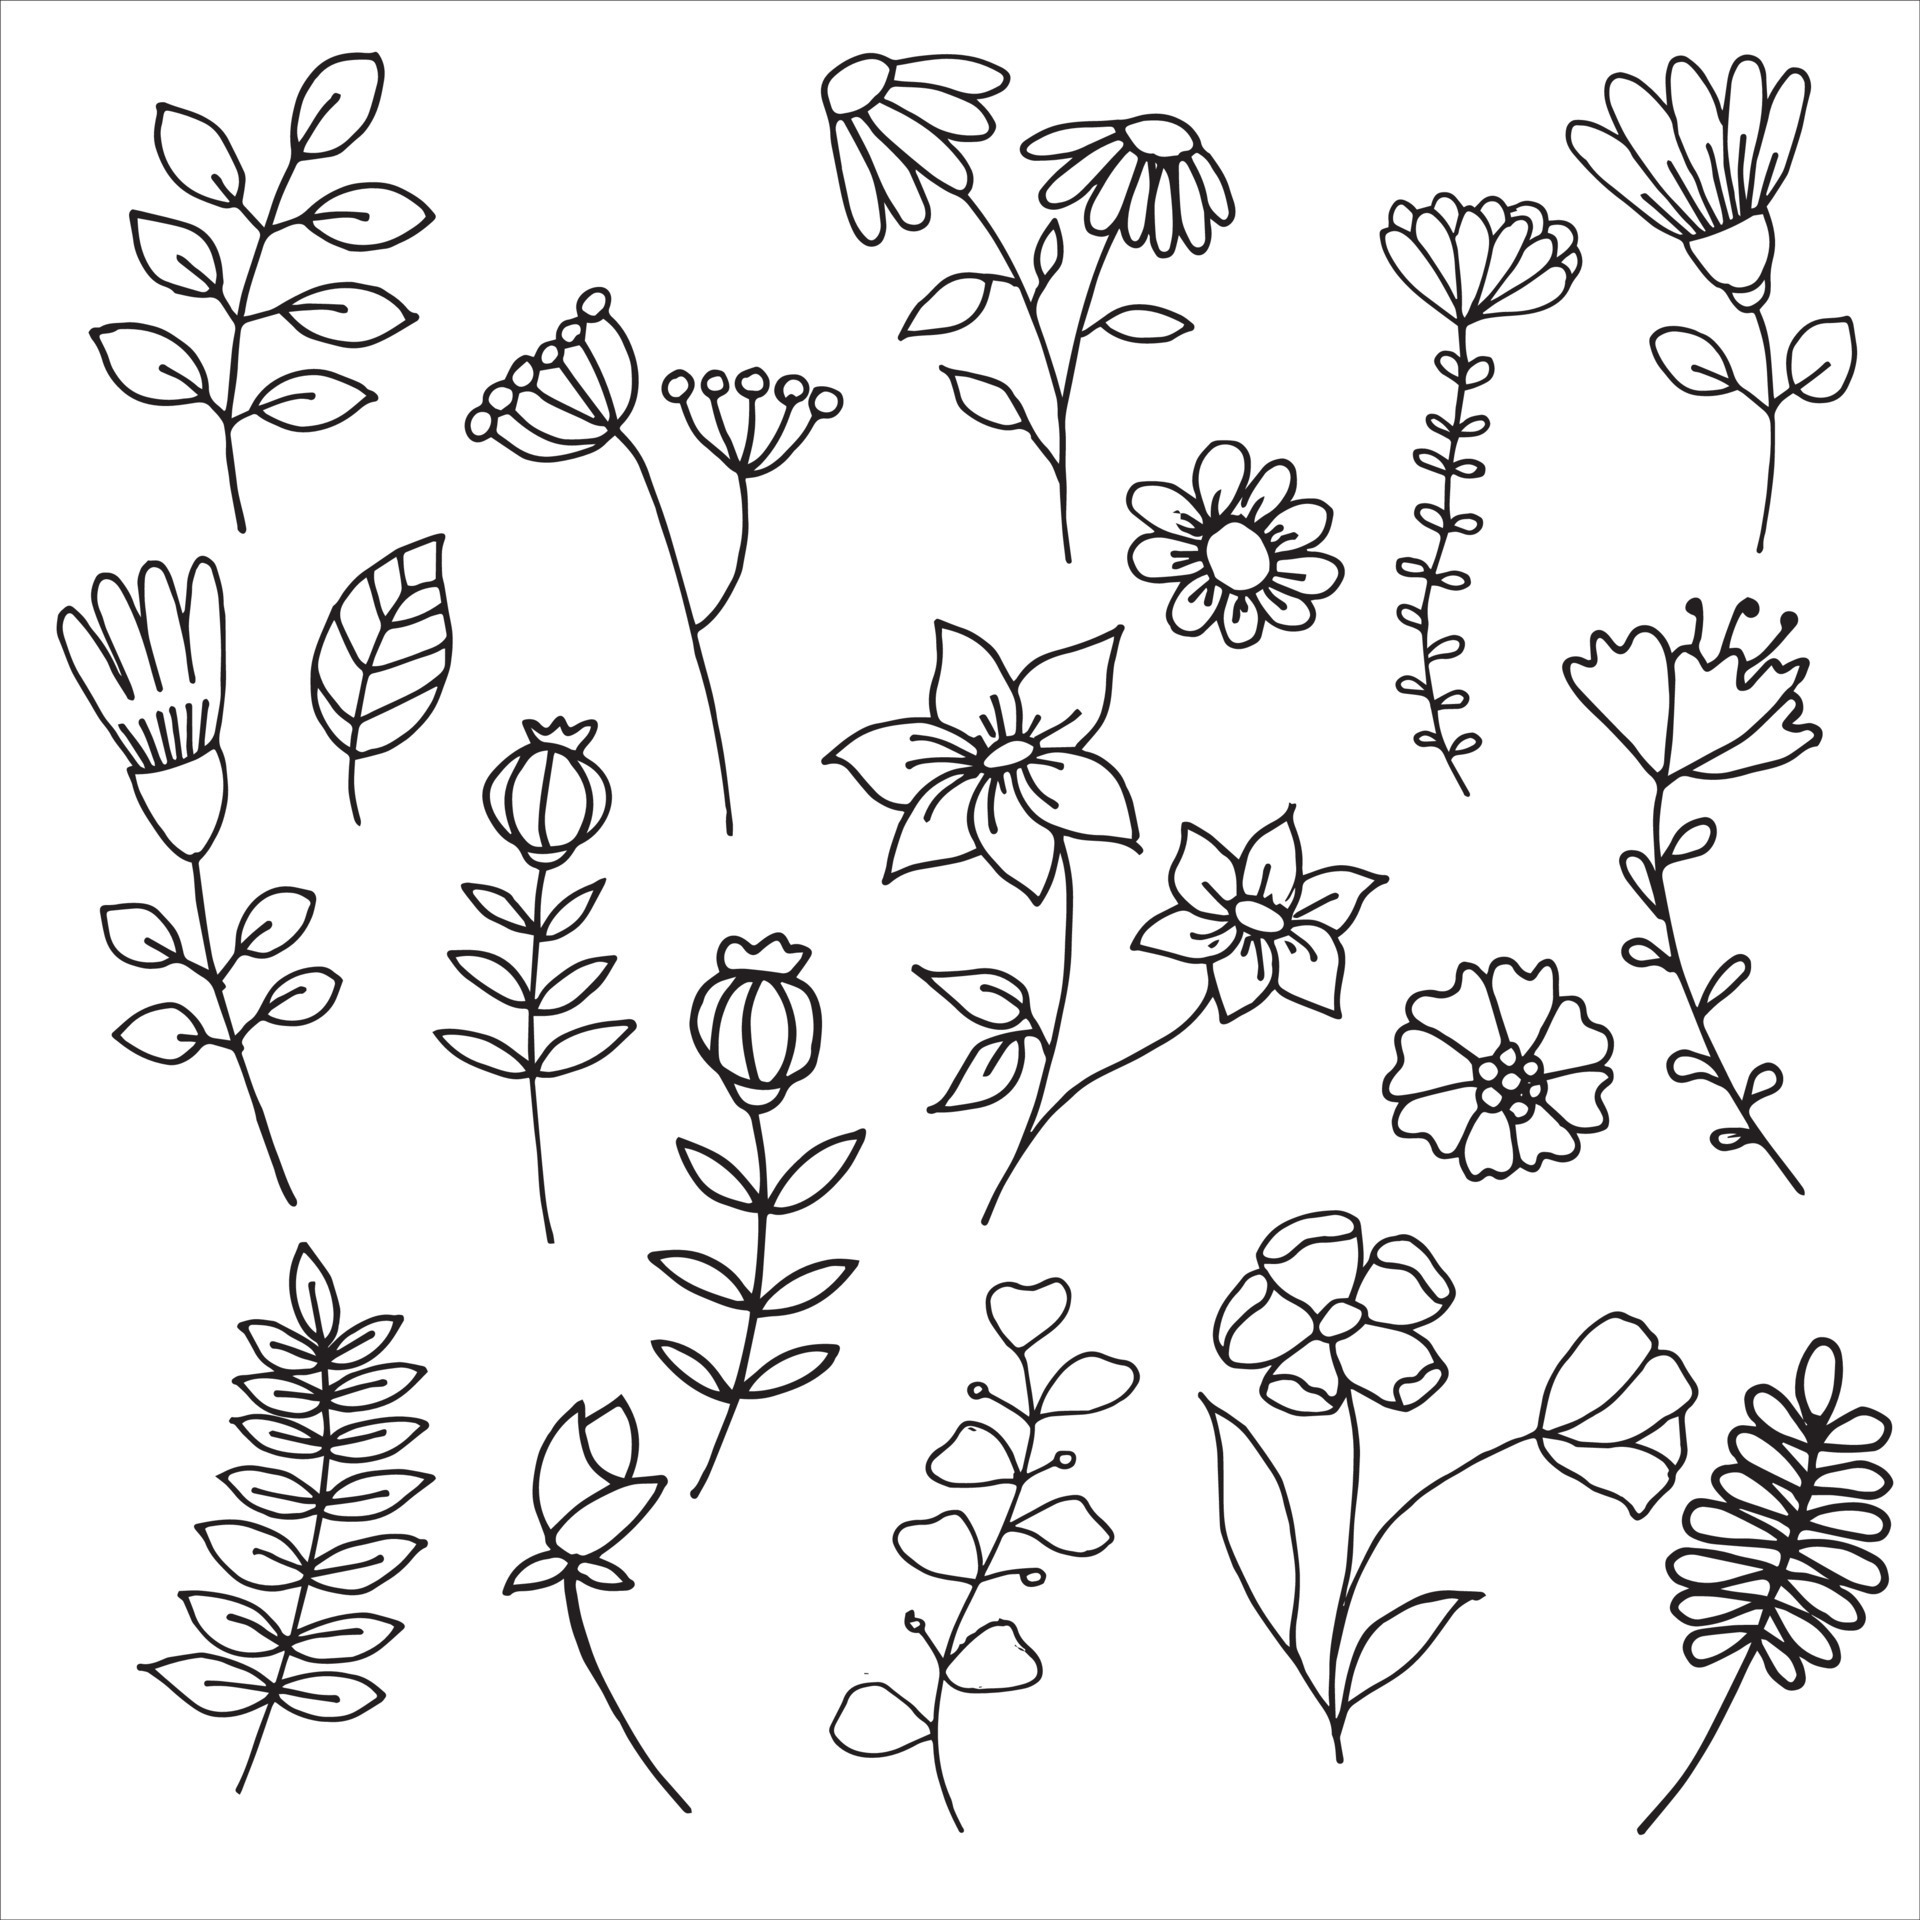 vector drawing in doodle style, cute flowers and plants, hand ...